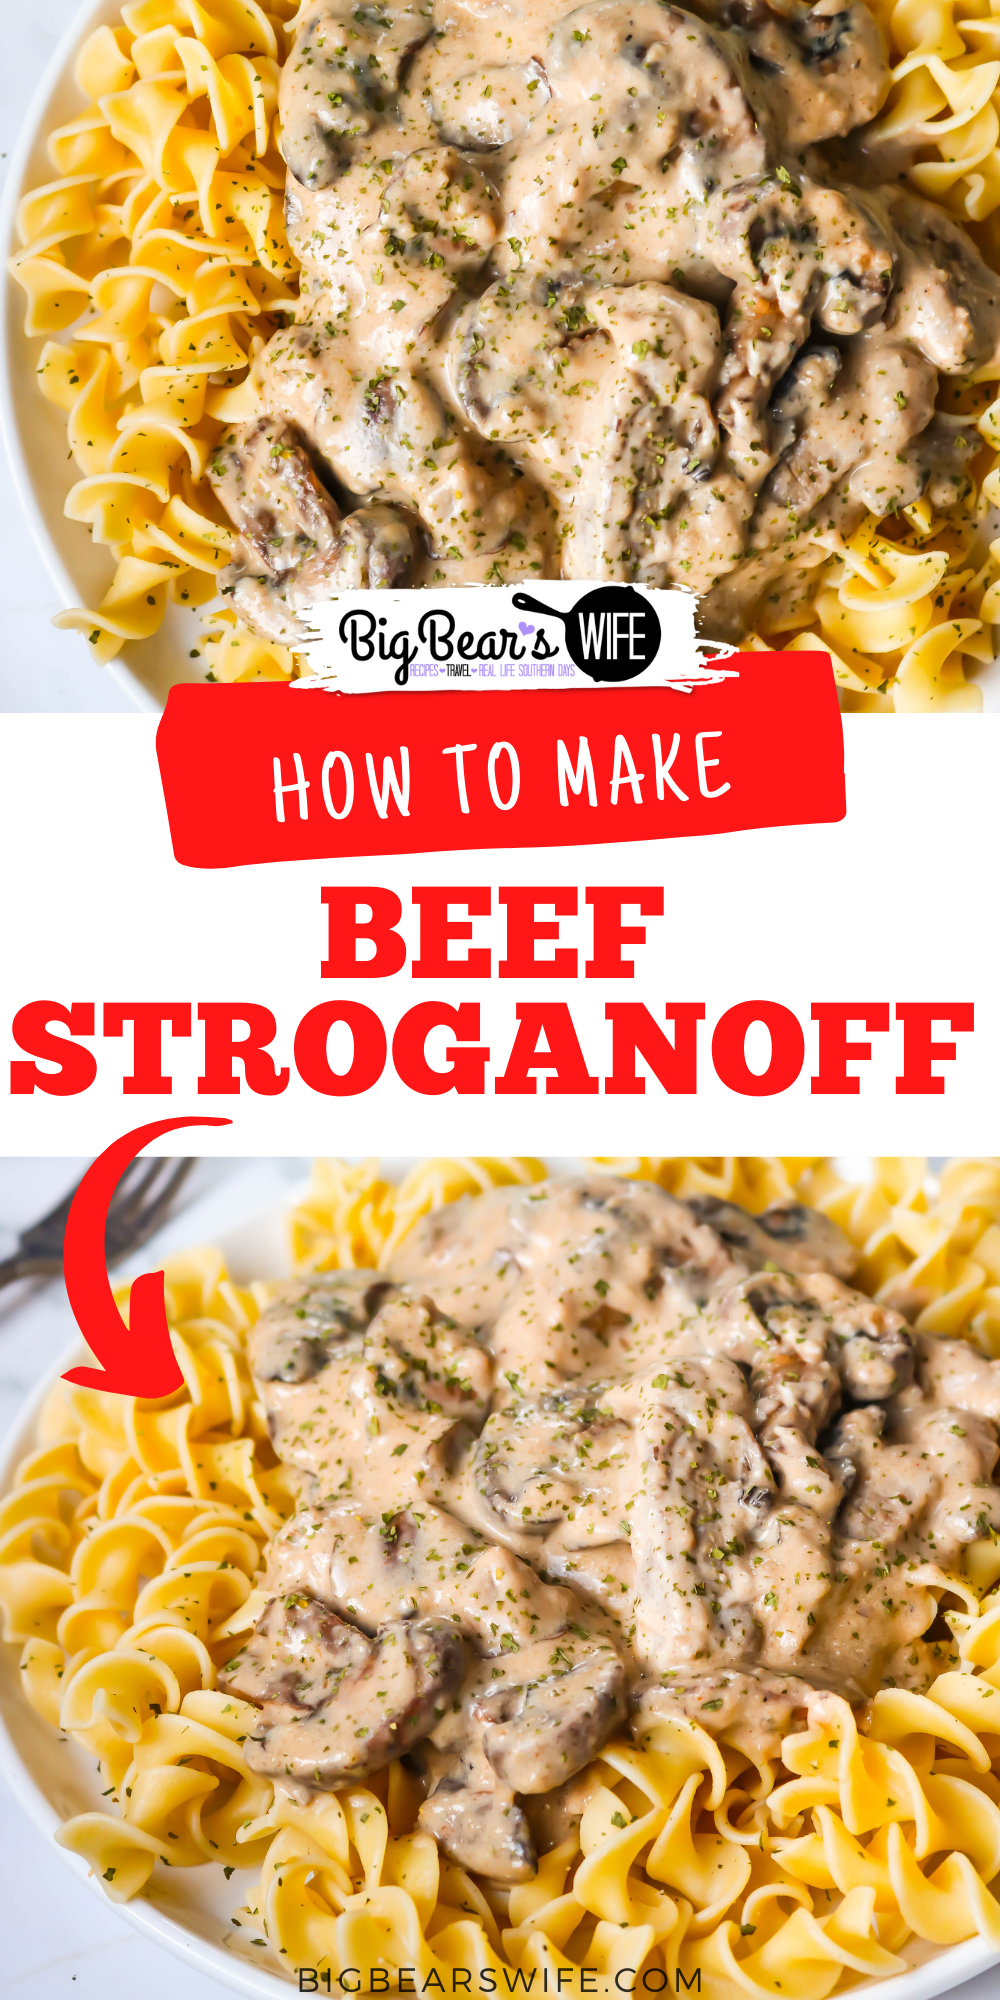 This super easy Beef Stroganoff is cooked with stripes of beef and lots of mushrooms is a delicious, creamy Stroganoff sauce. Perfect when served over egg noodles, rice or mashed potatoes.  via @bigbearswife